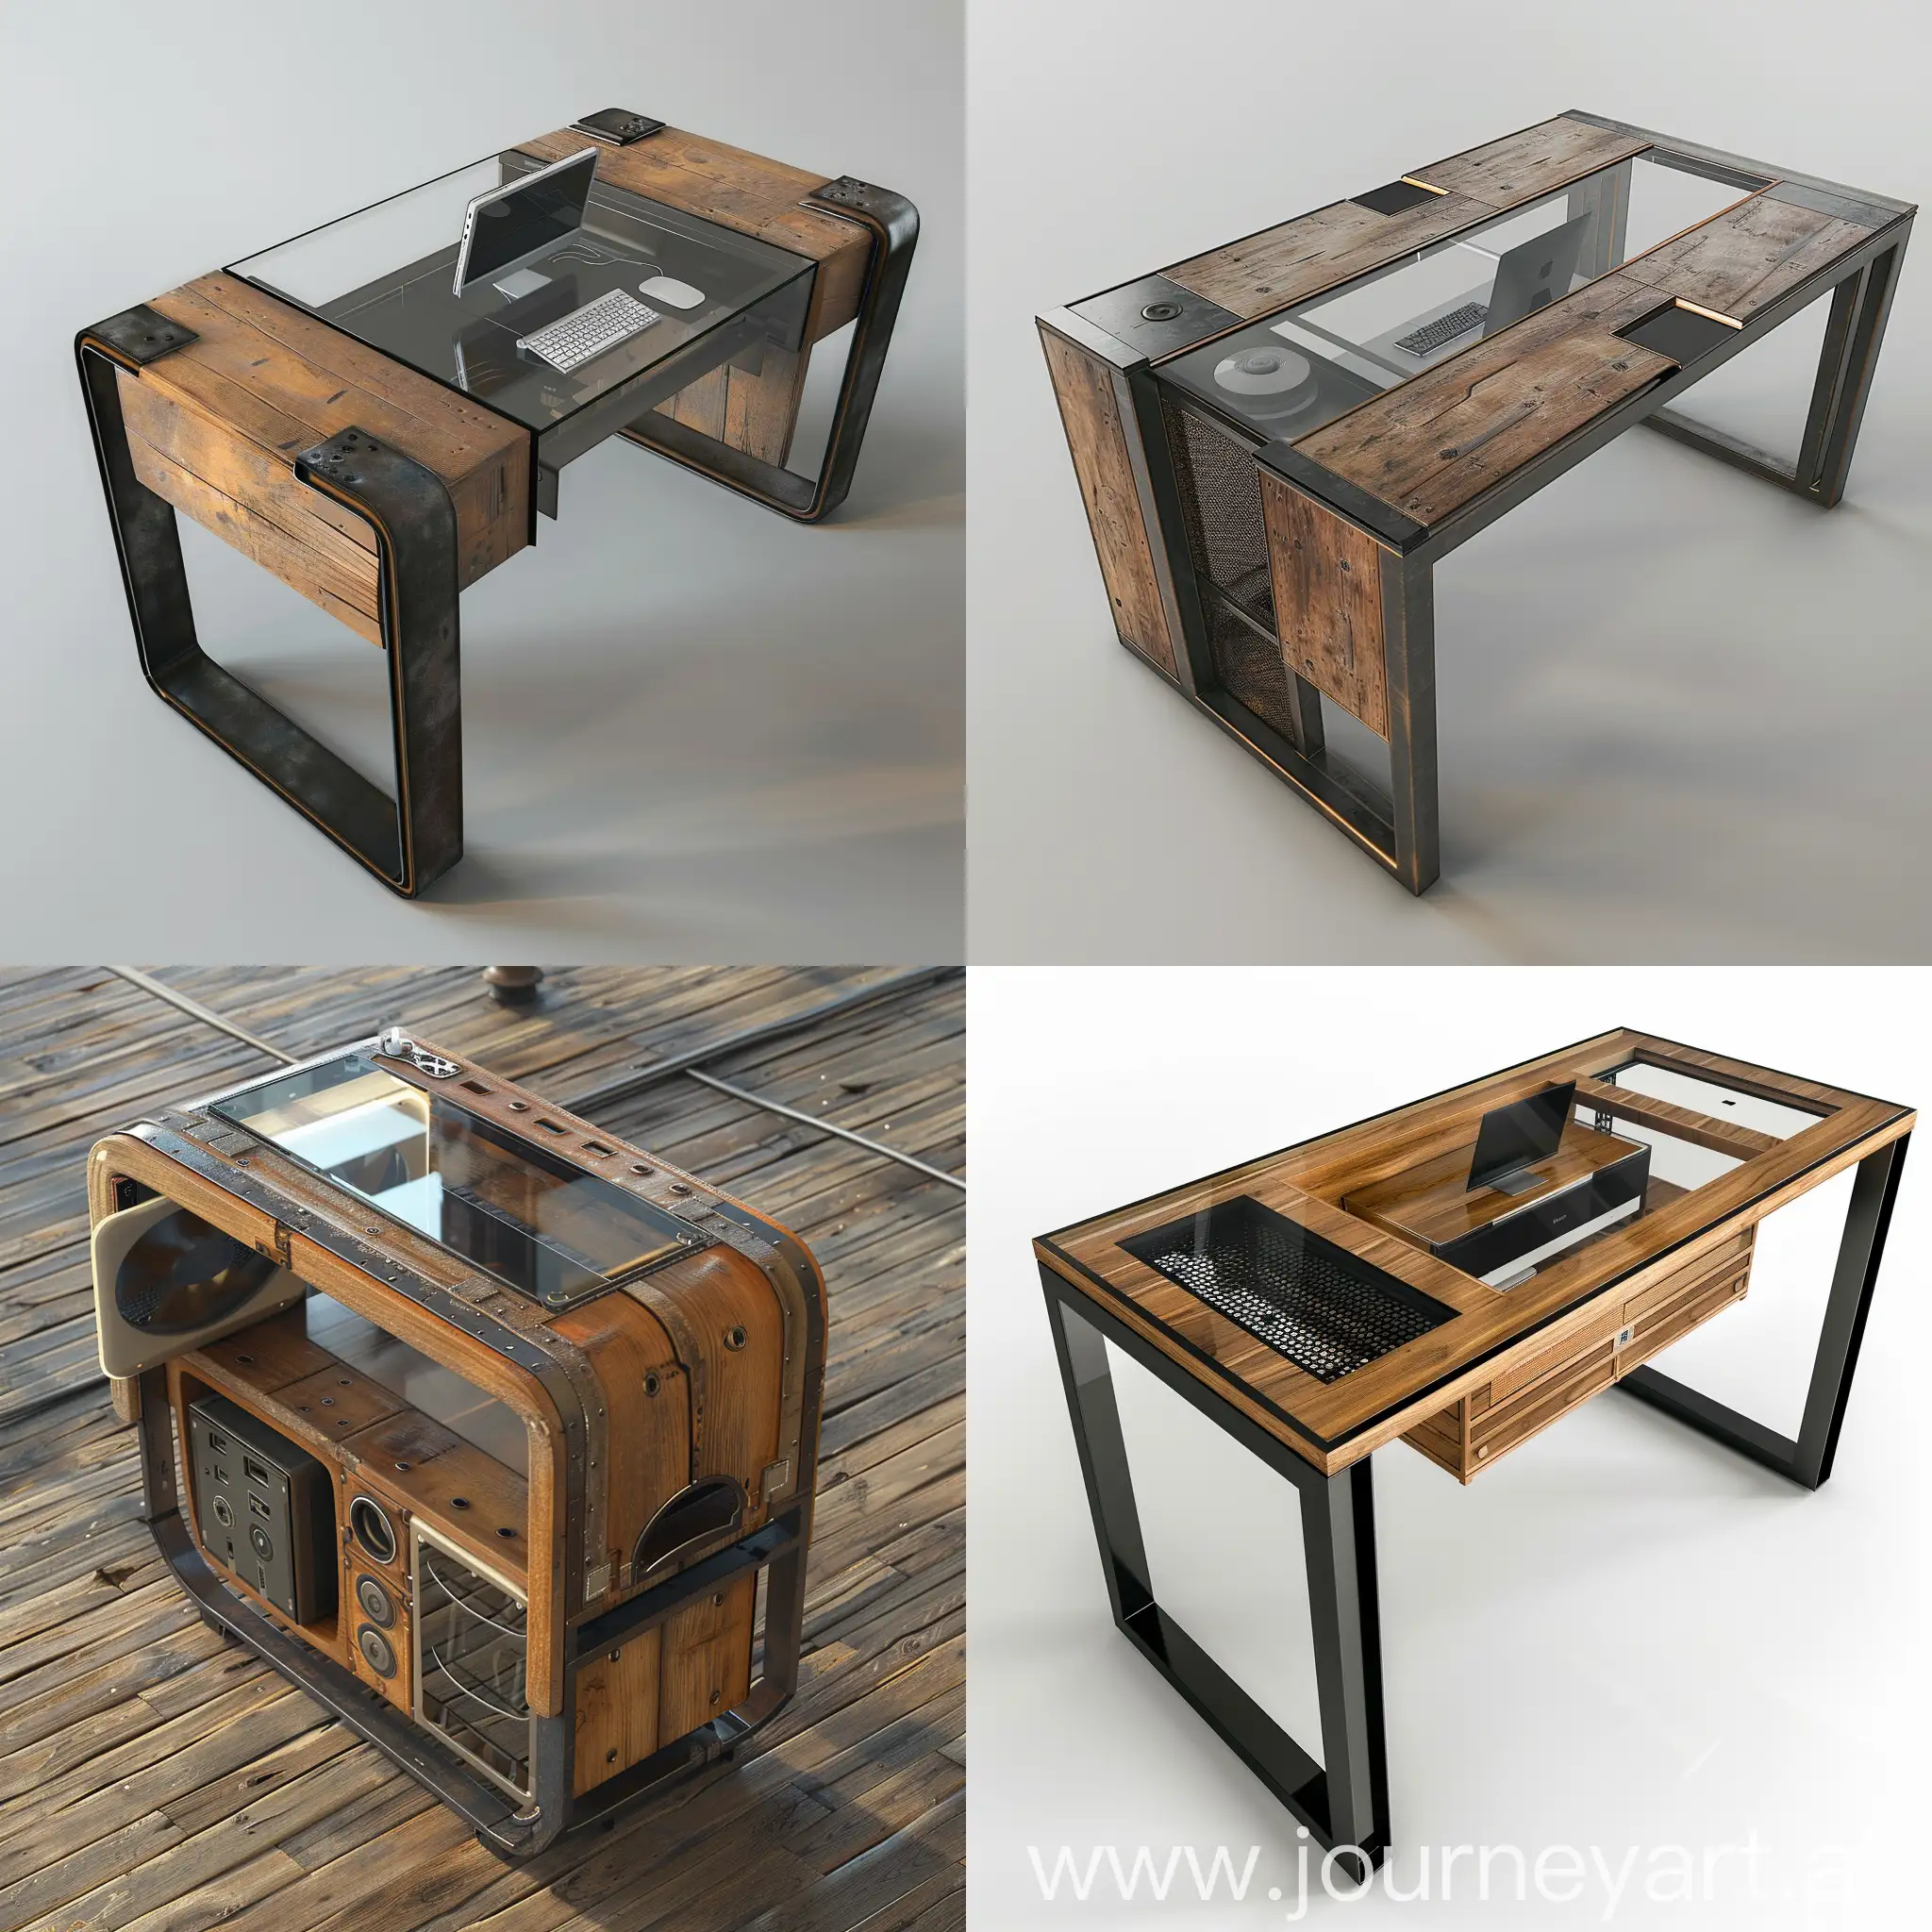 Table, There is a computer inside,Glass on top of the table, Minimalistic style,Top and side view, A mixture of wood and iron, 4k
